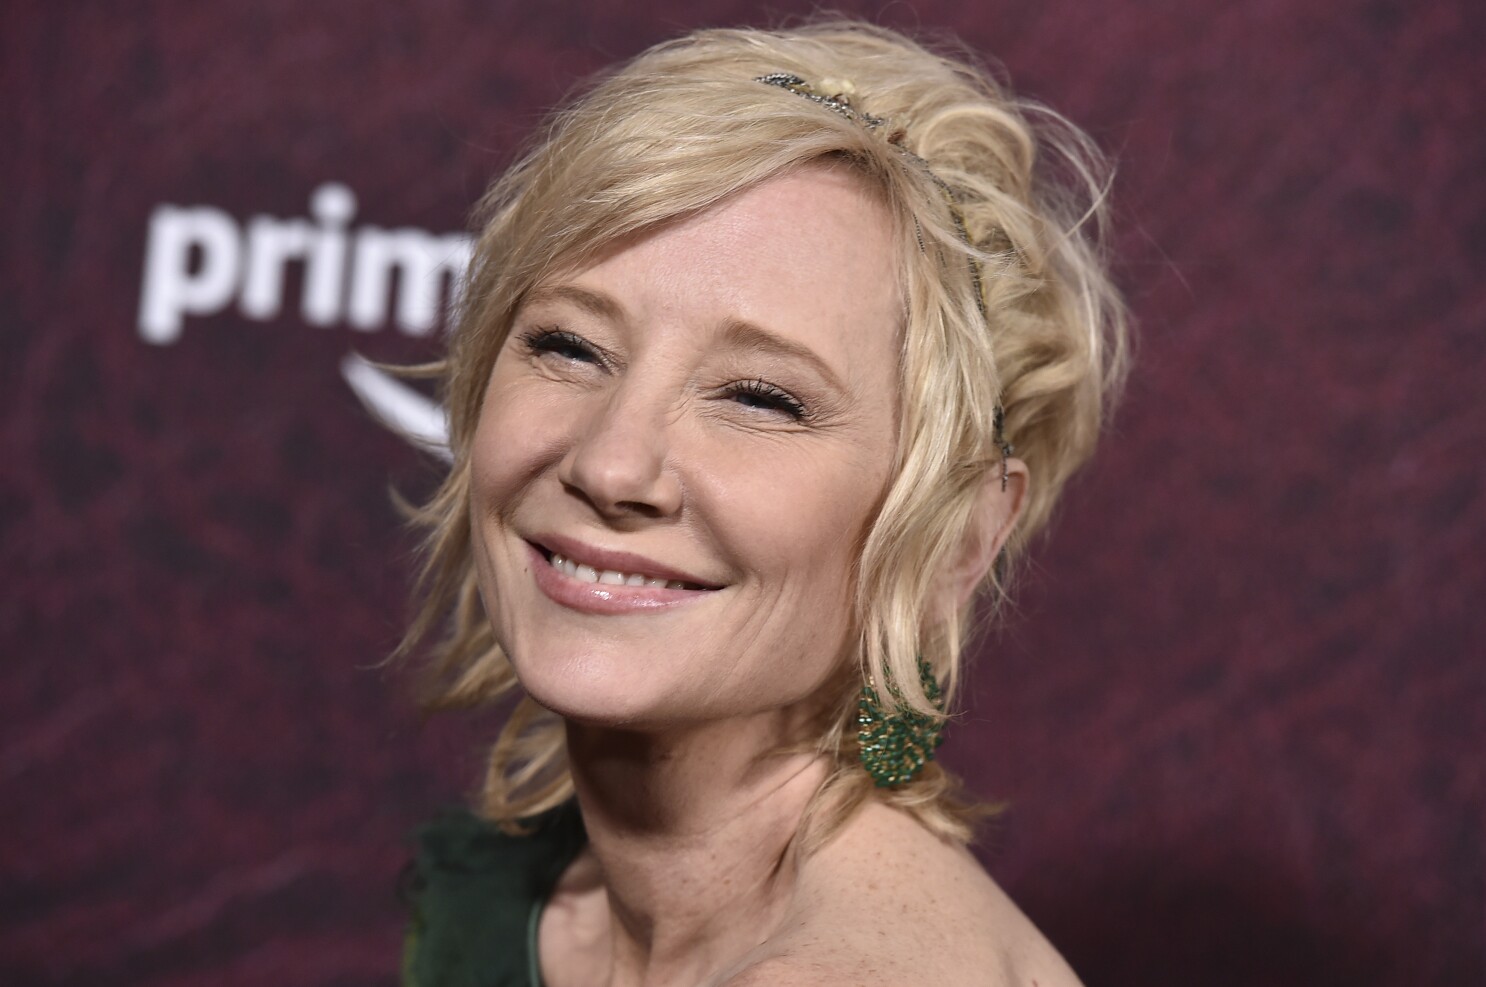 Anne Heche not expected to survive after fiery Los Angeles crash